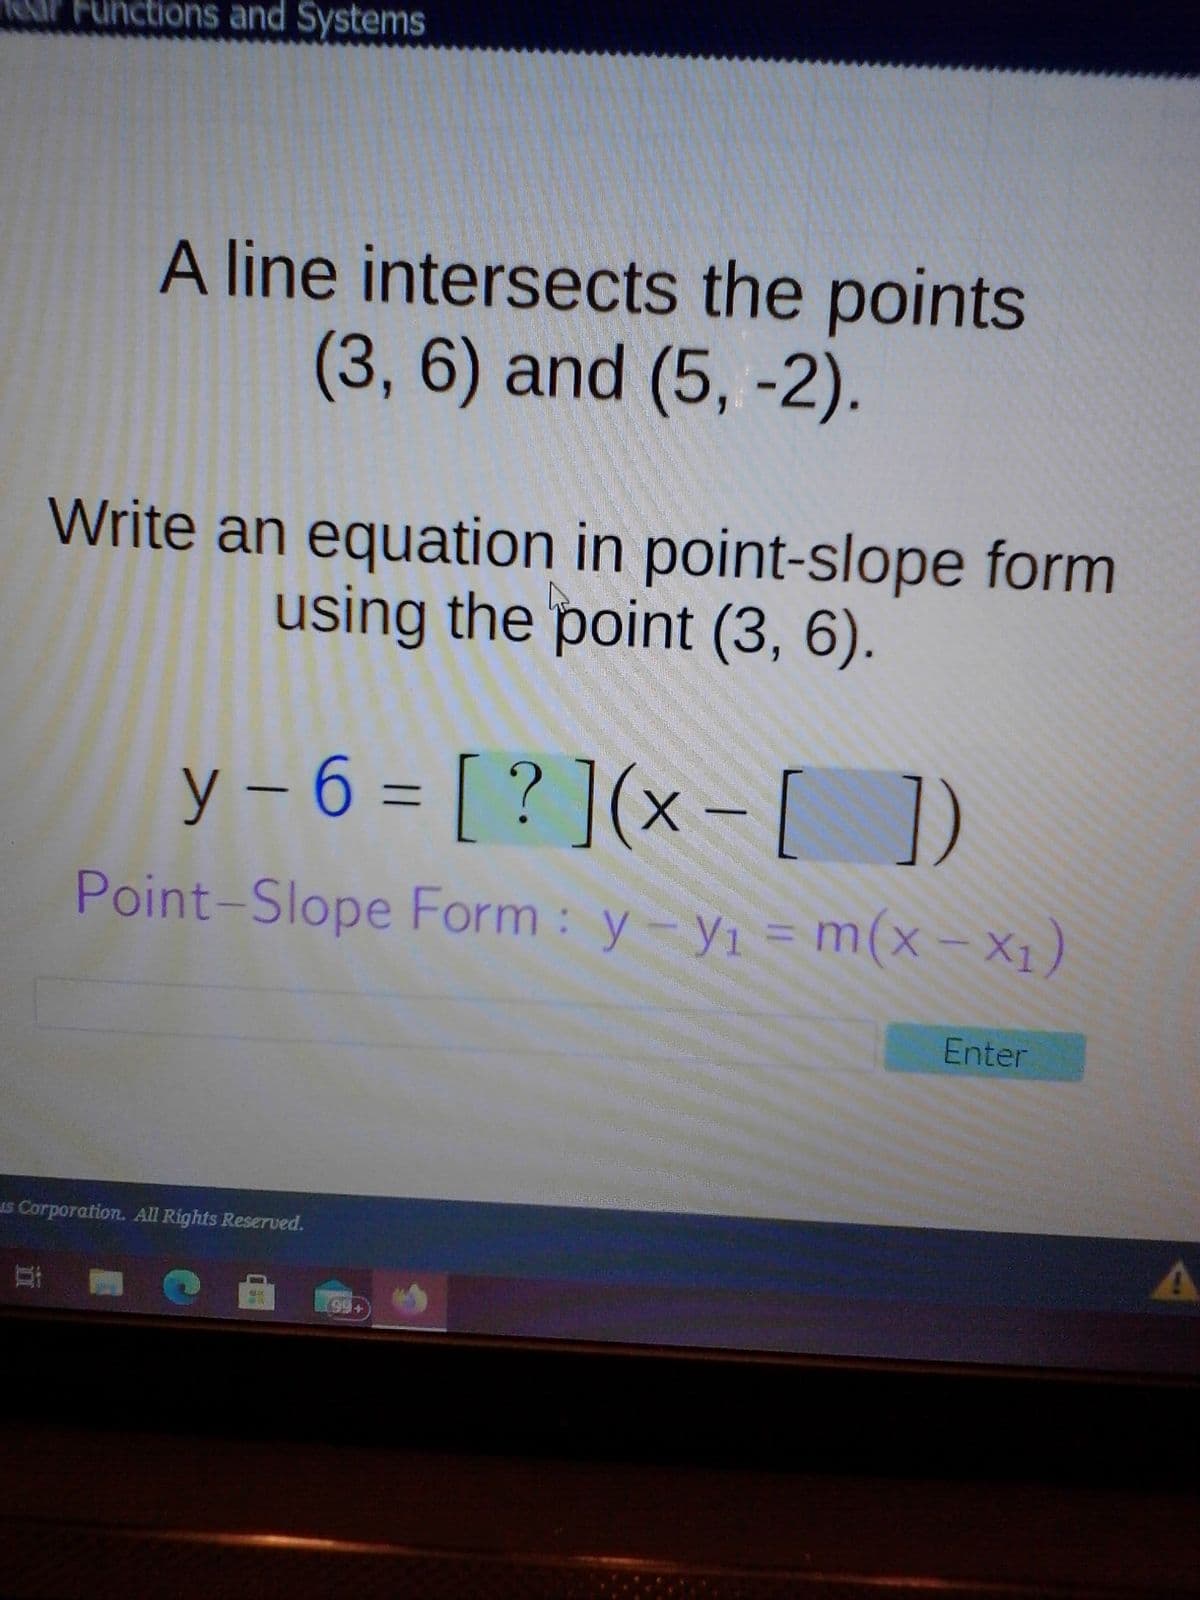 AP Functions and Systems
A line intersects the points
(3, 6) and (5, -2).
Write an equation in point-slope form
using the point (3, 6).
y – 6 = [ ? ](x – [ )
Point-Slope Form: y-yı
= m(x- X1)
=Dm
Enter
1s Corporation. All Rights Reserved.
耳
99+
